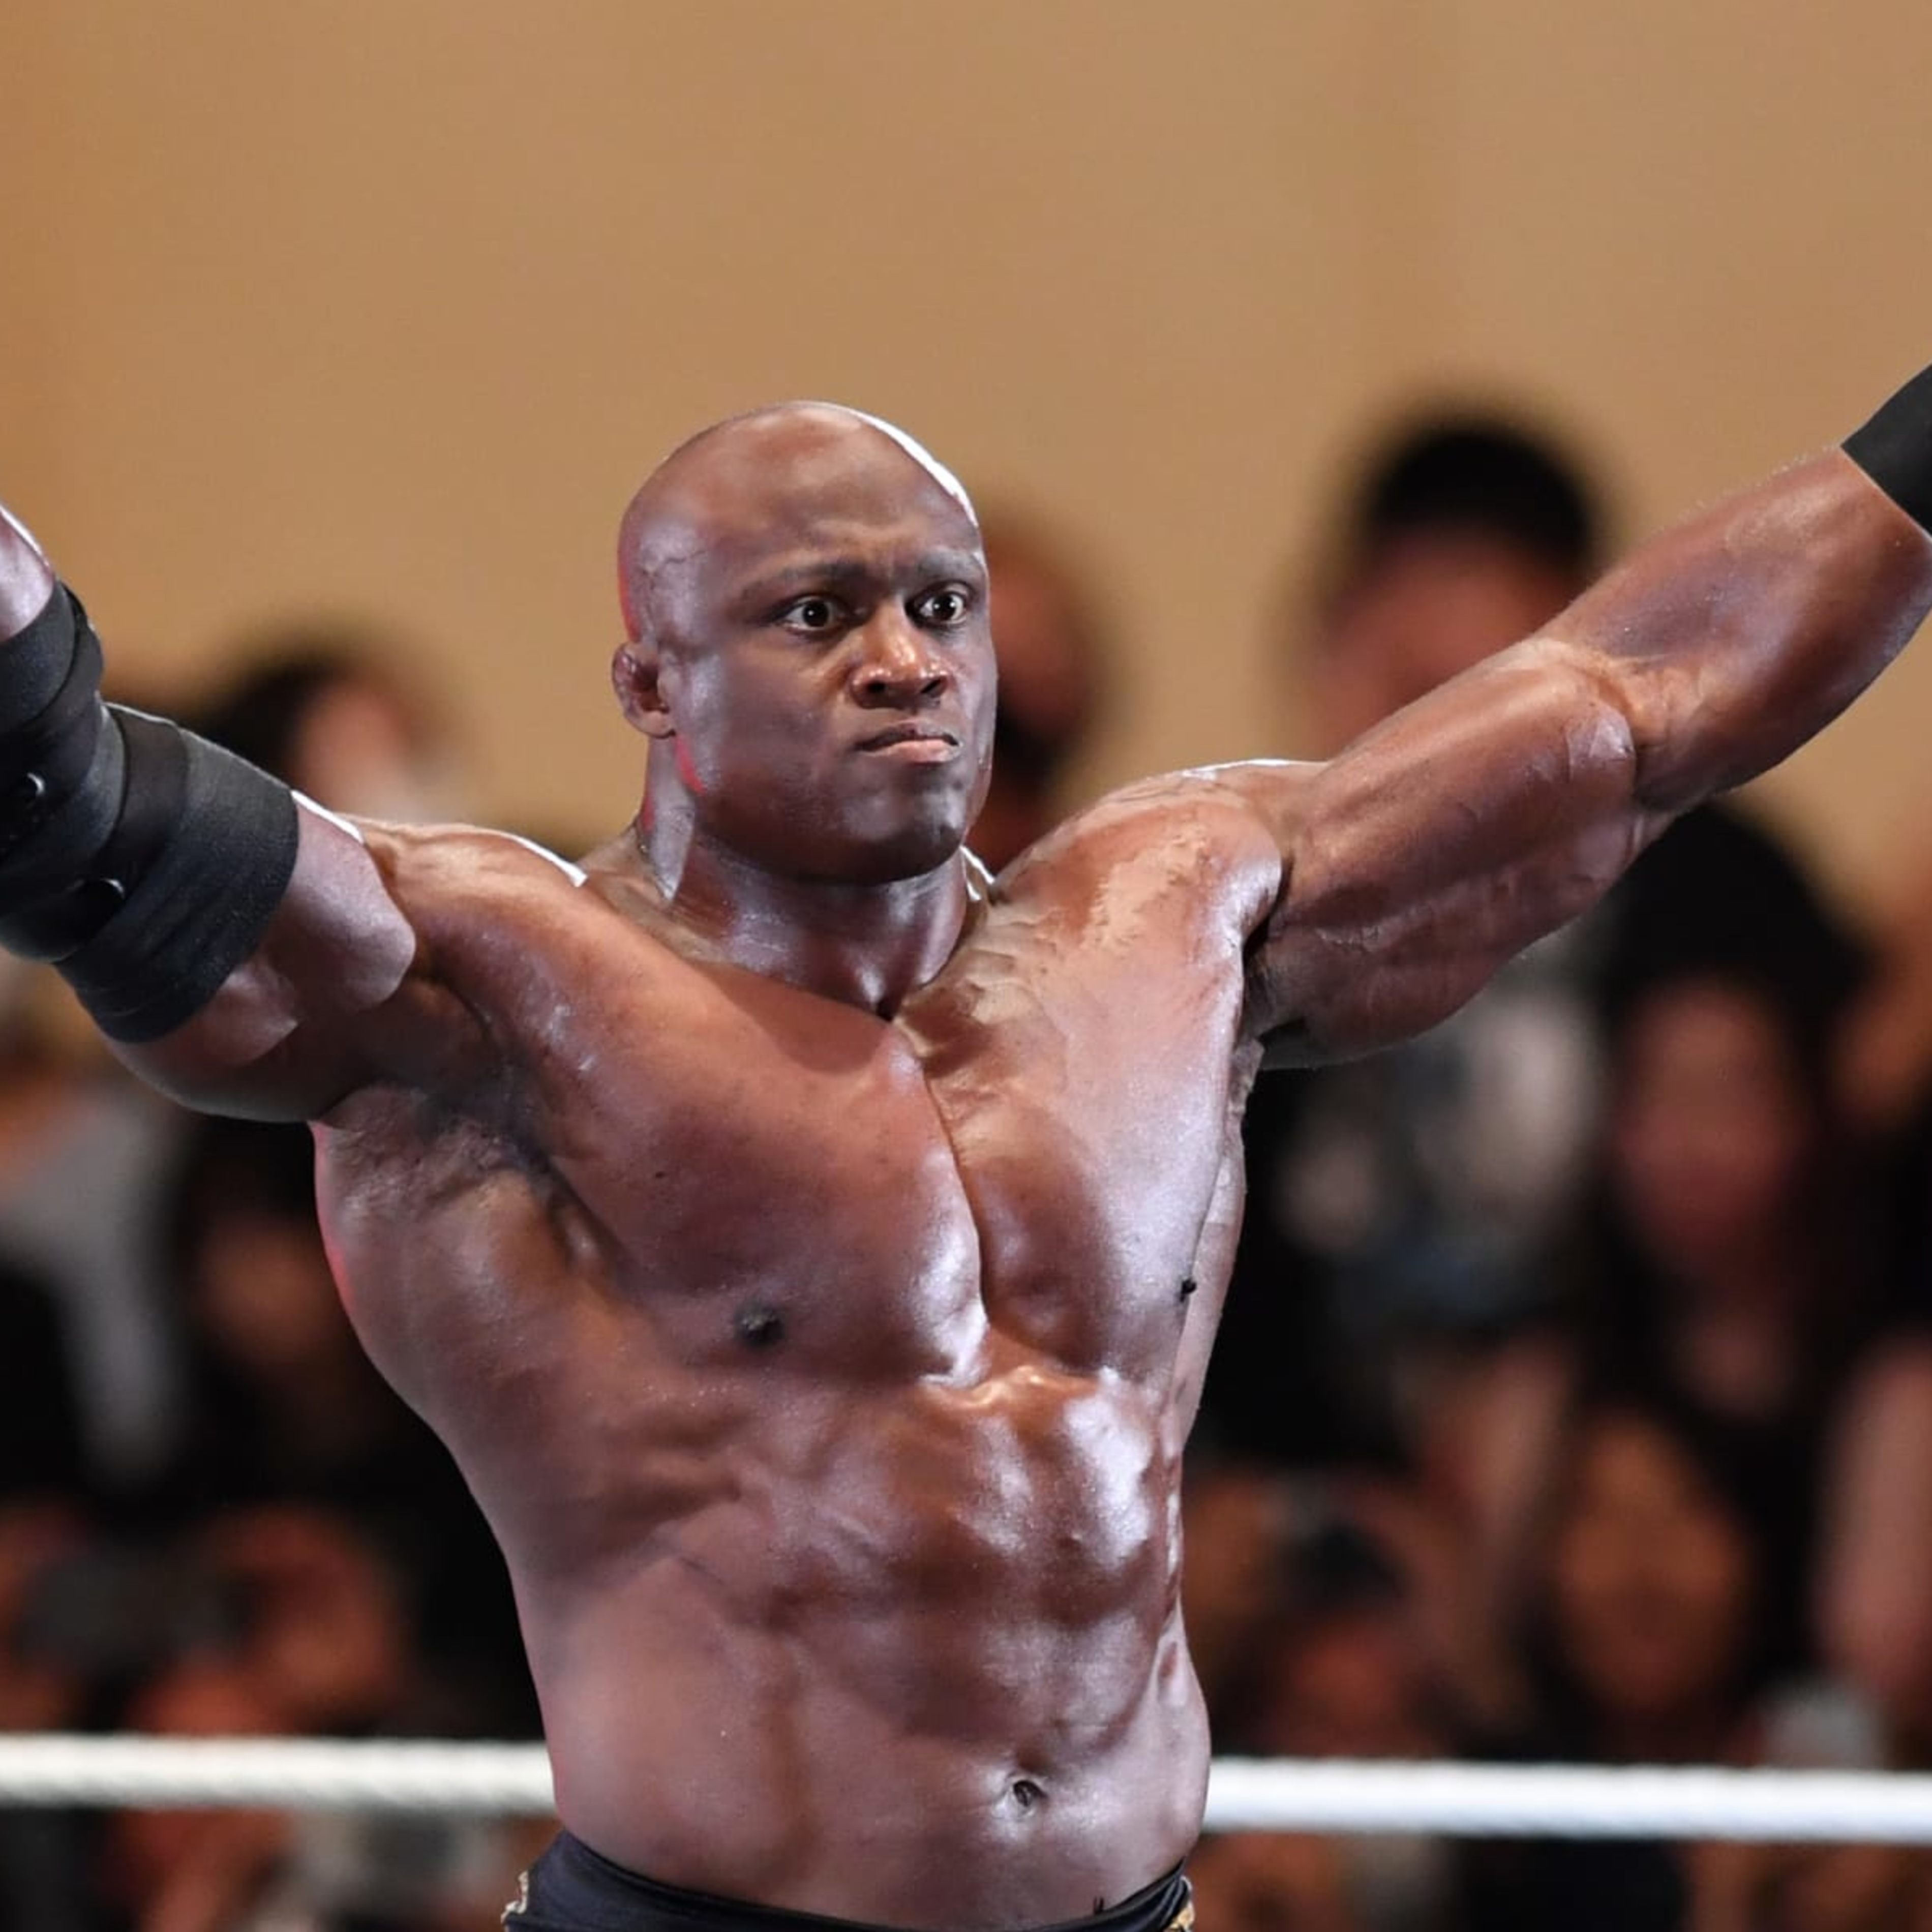 WWE’s Bobby Lashley Was Approached About Mike Tyson Bare Knuckle Boxing Fight at MSG